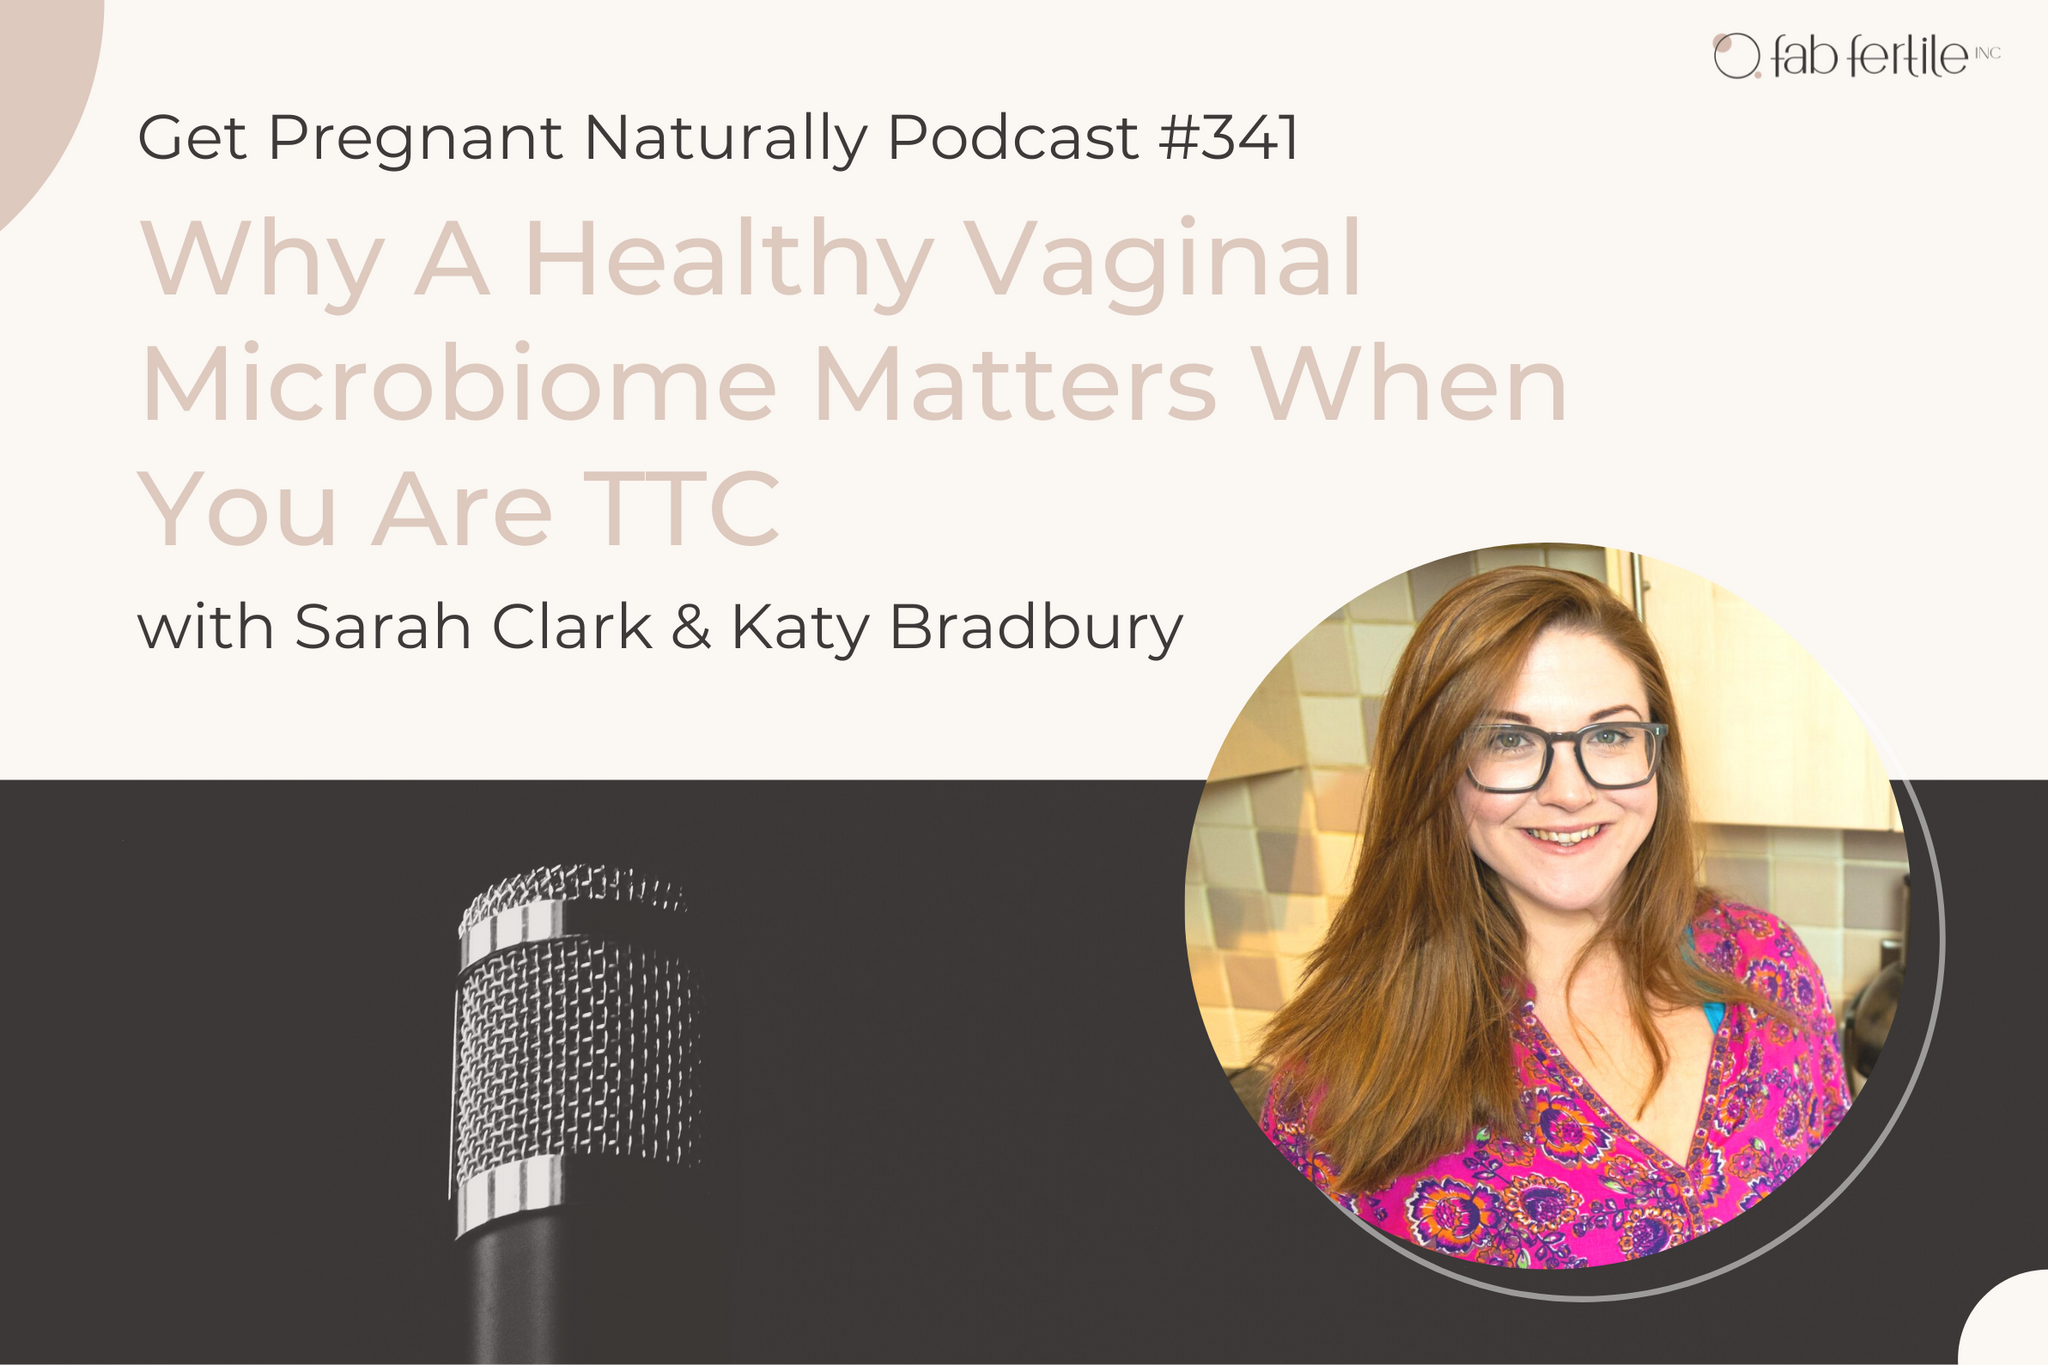 Why A Healthy Vaginal Microbiome Matters When You Are TTC